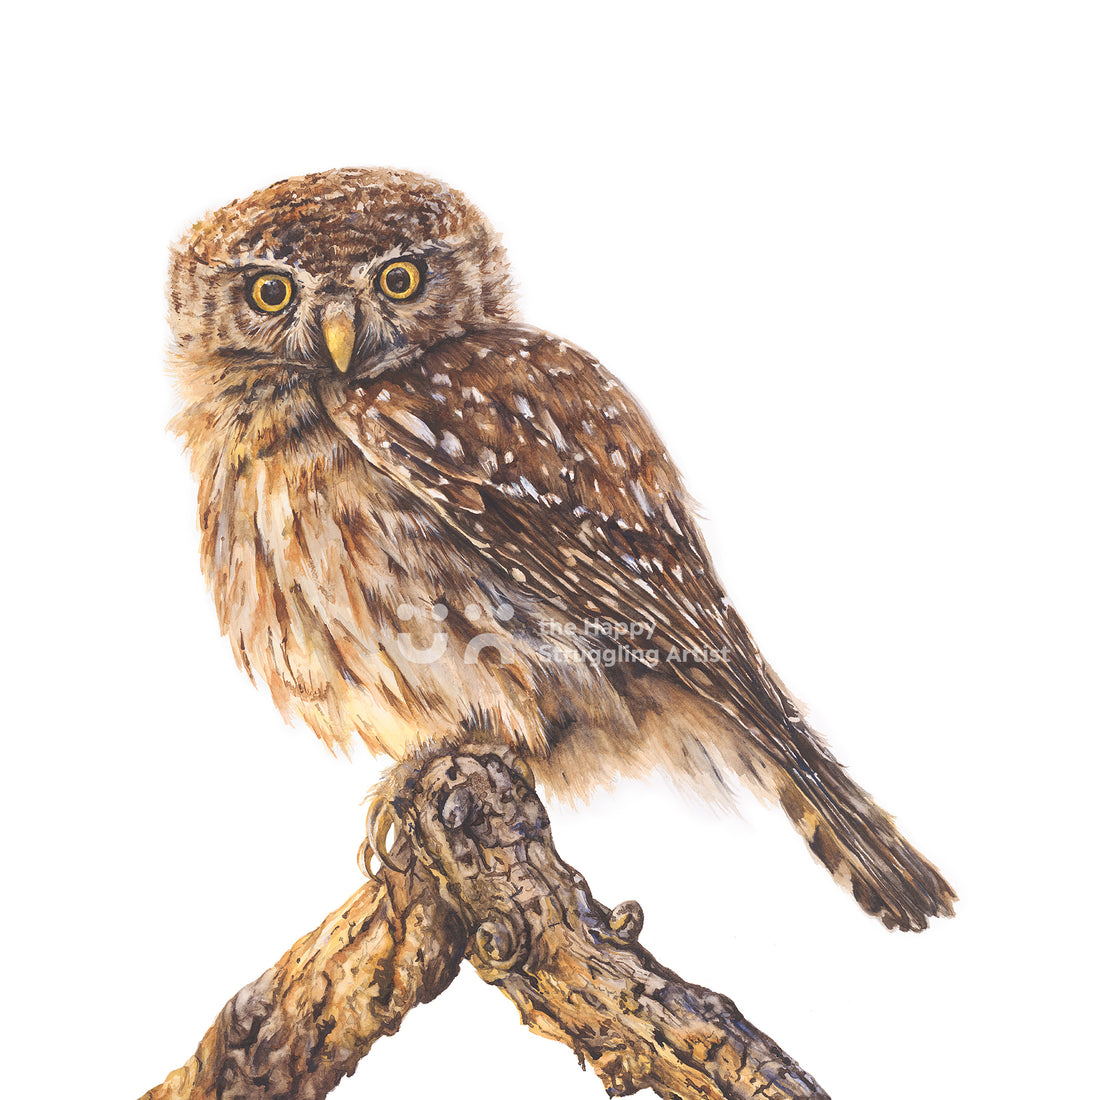 "Awake", a Pearl-spotted Owlet in watercolour